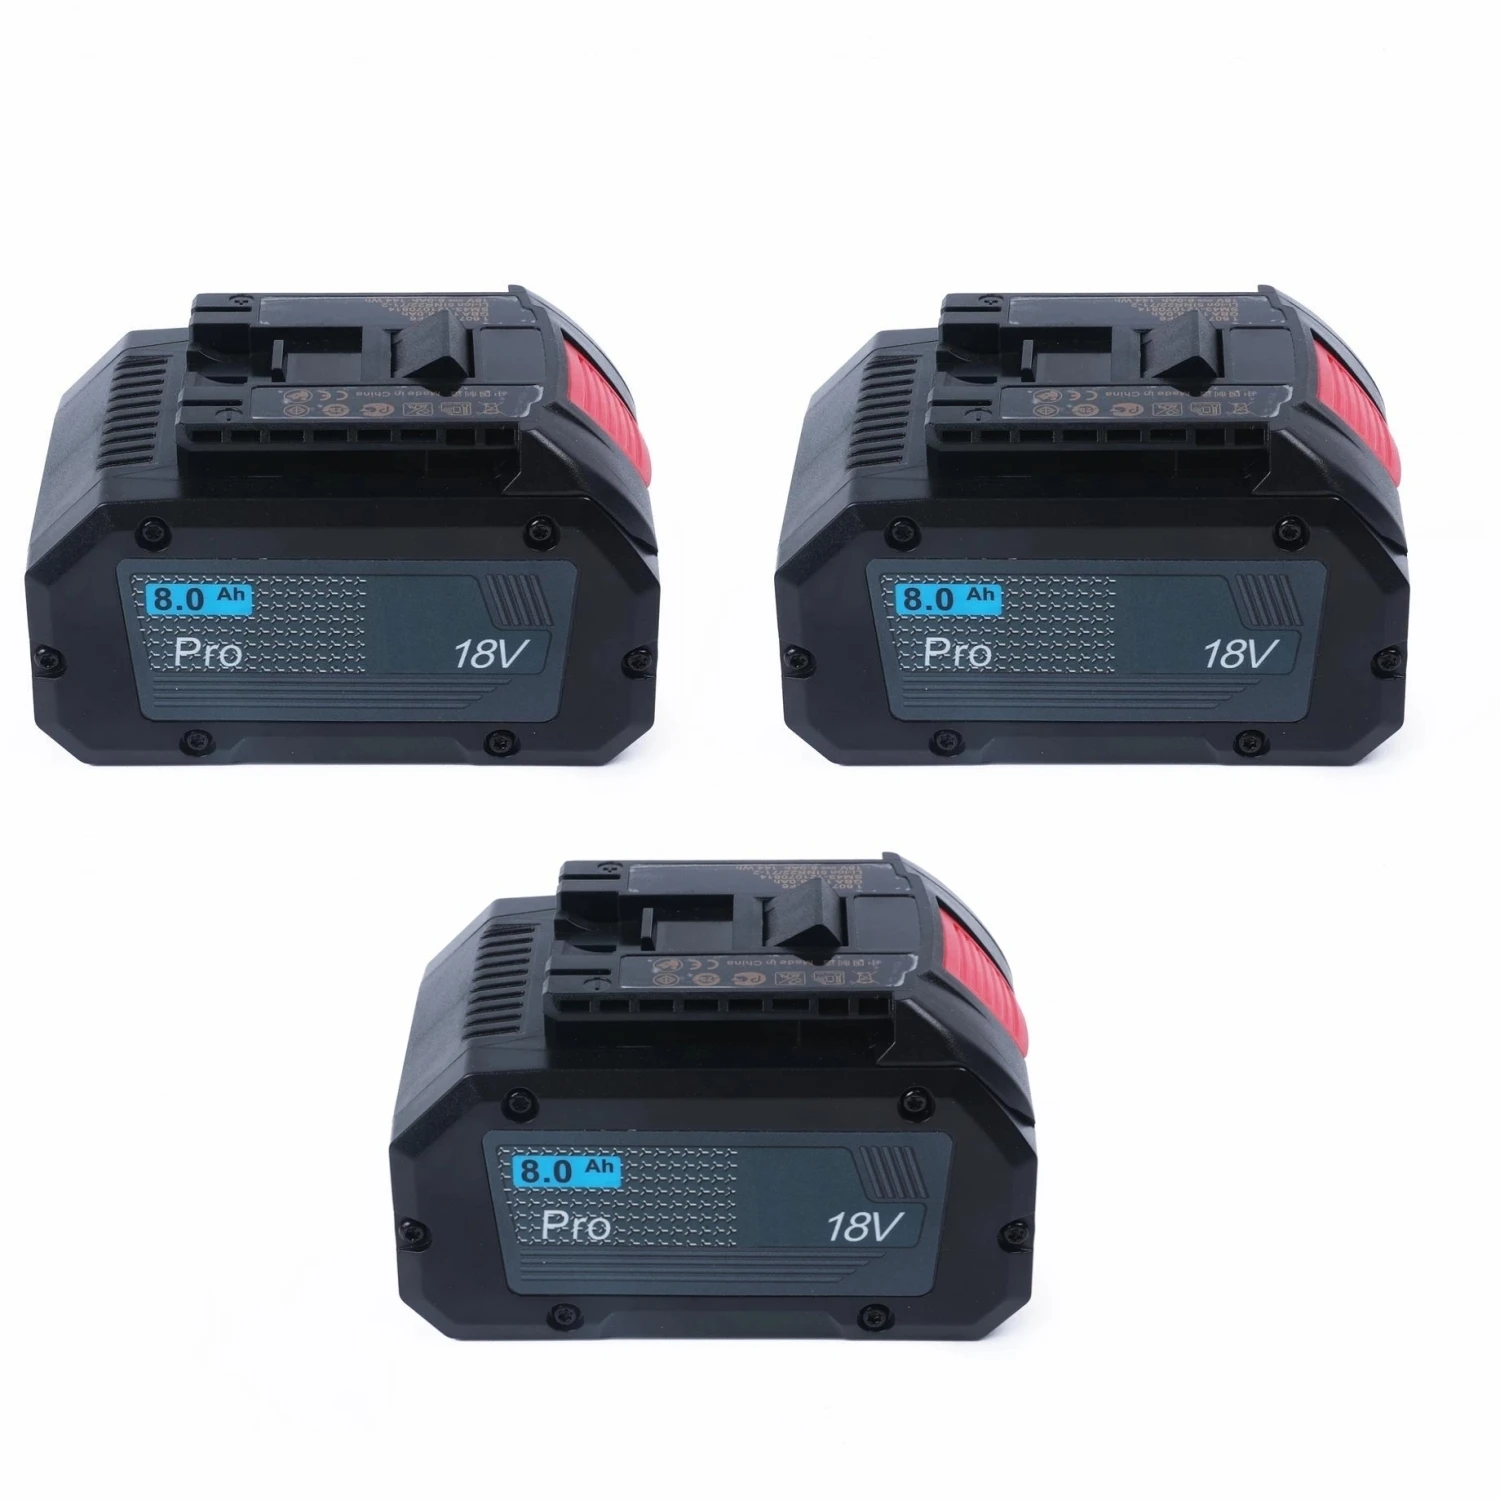 

3Pack New 18V 8.0Ah Lithium-Ion Battery Pack Akku for Bosch 18V MAX Cordless Power Tools Drill Saw Hammer for GBA18V80 GBA18V120